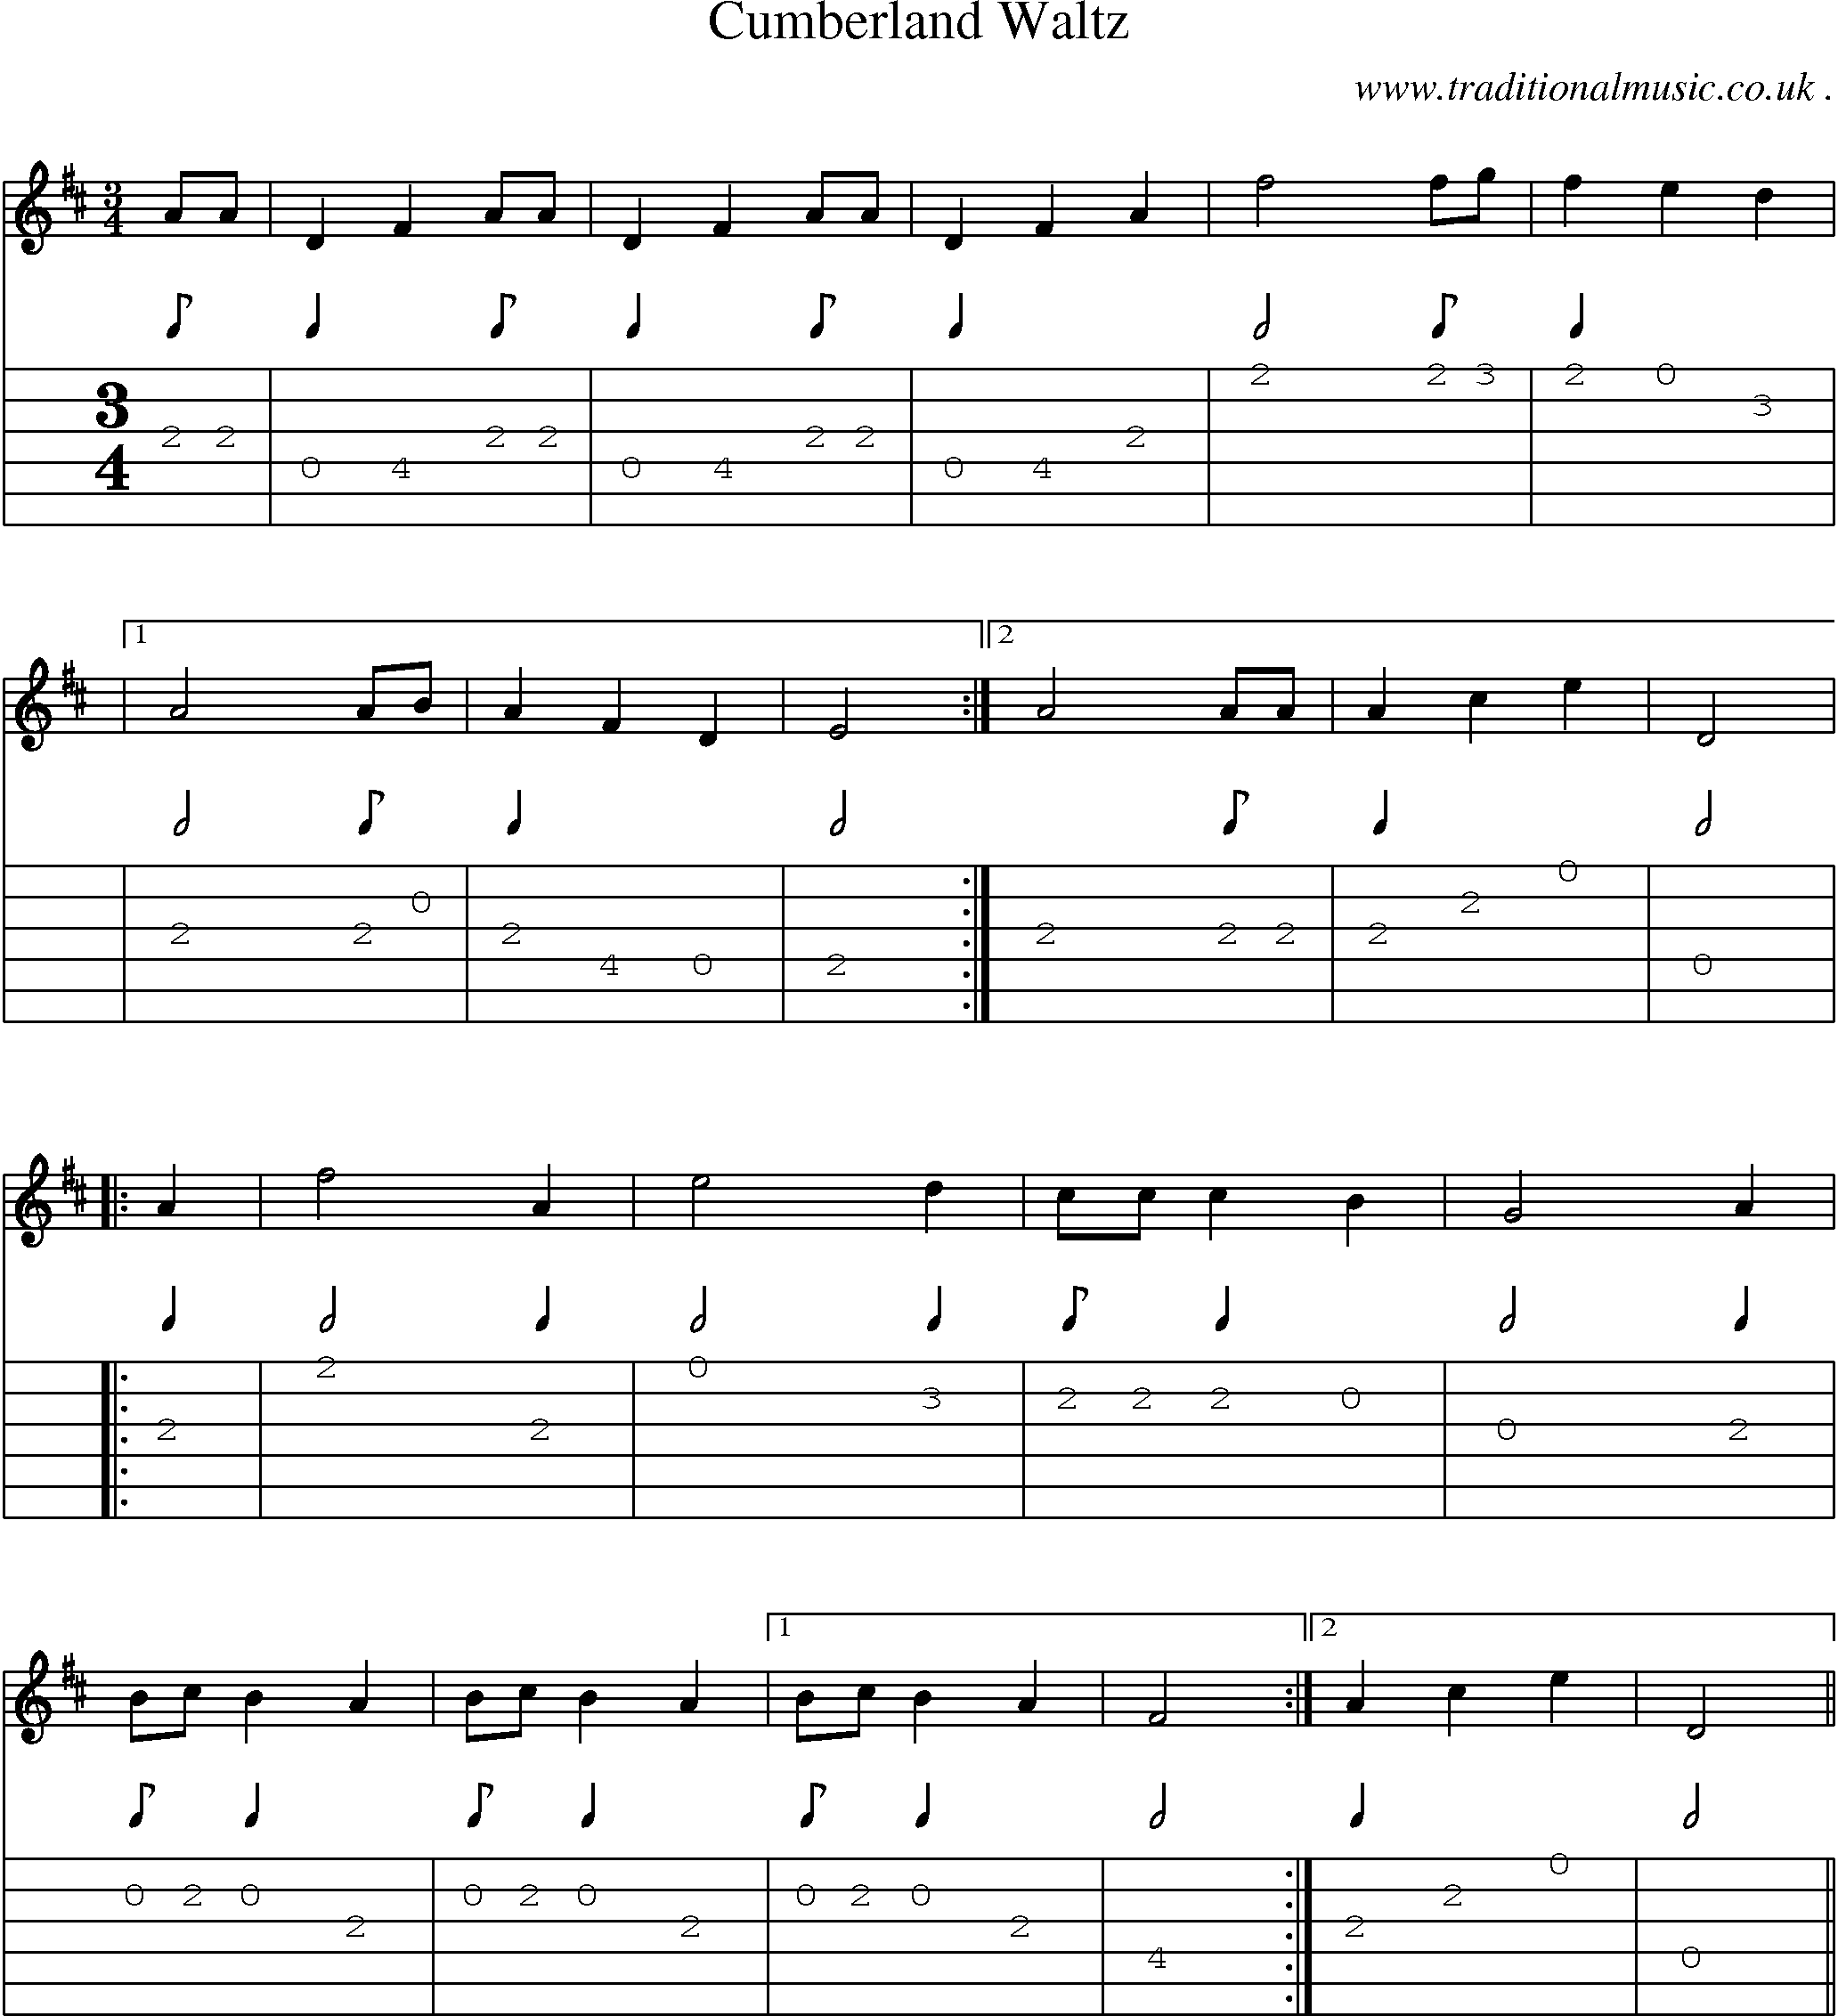 Sheet-Music and Guitar Tabs for Cumberland Waltz